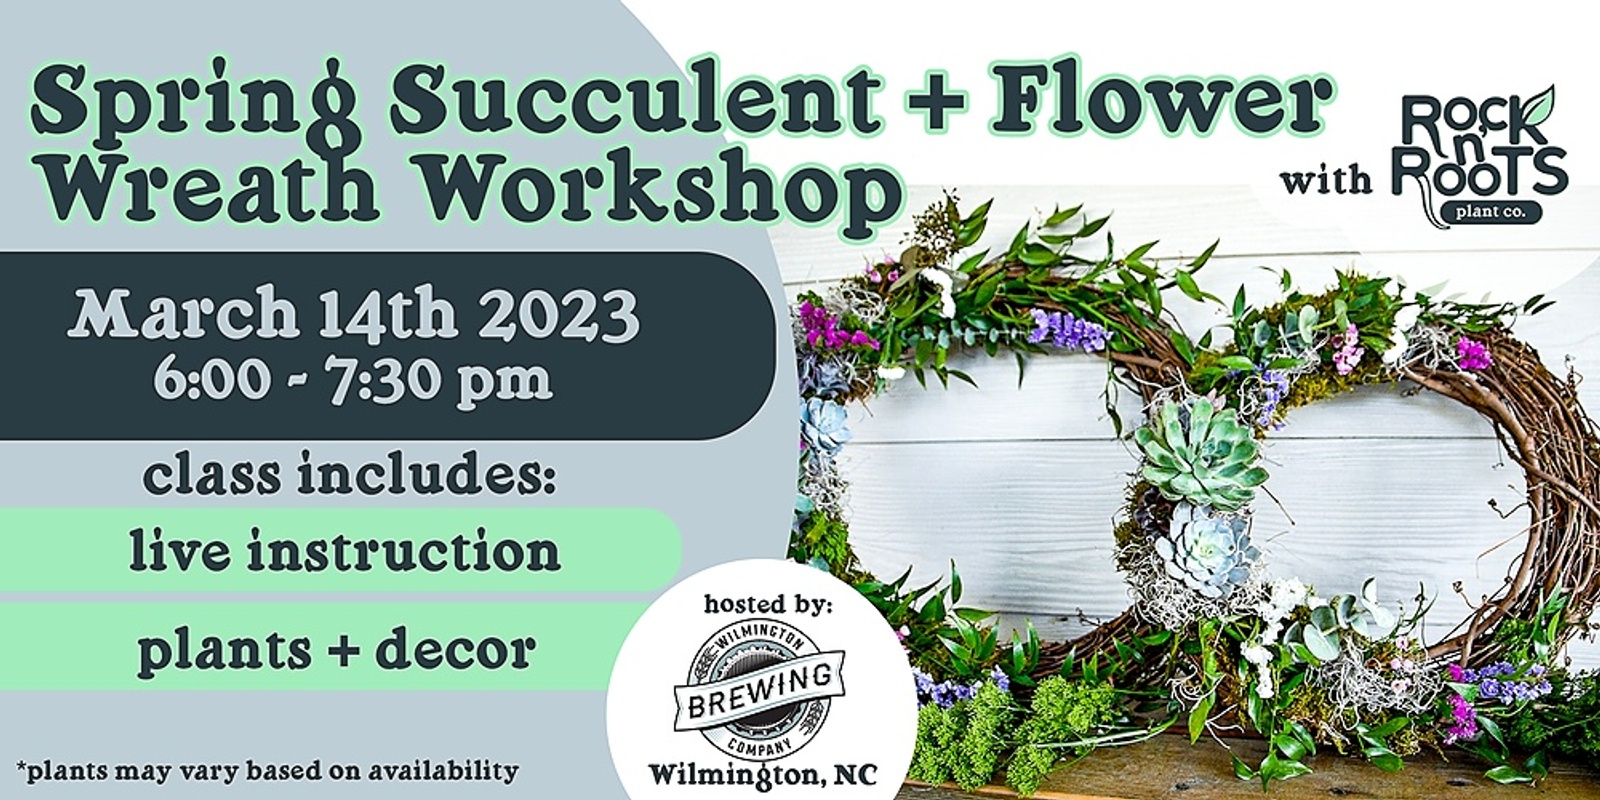 Banner image for Spring Succulent + Flower Wreath Workshop at Wilmington Brewing Company (Wilmington, NC)